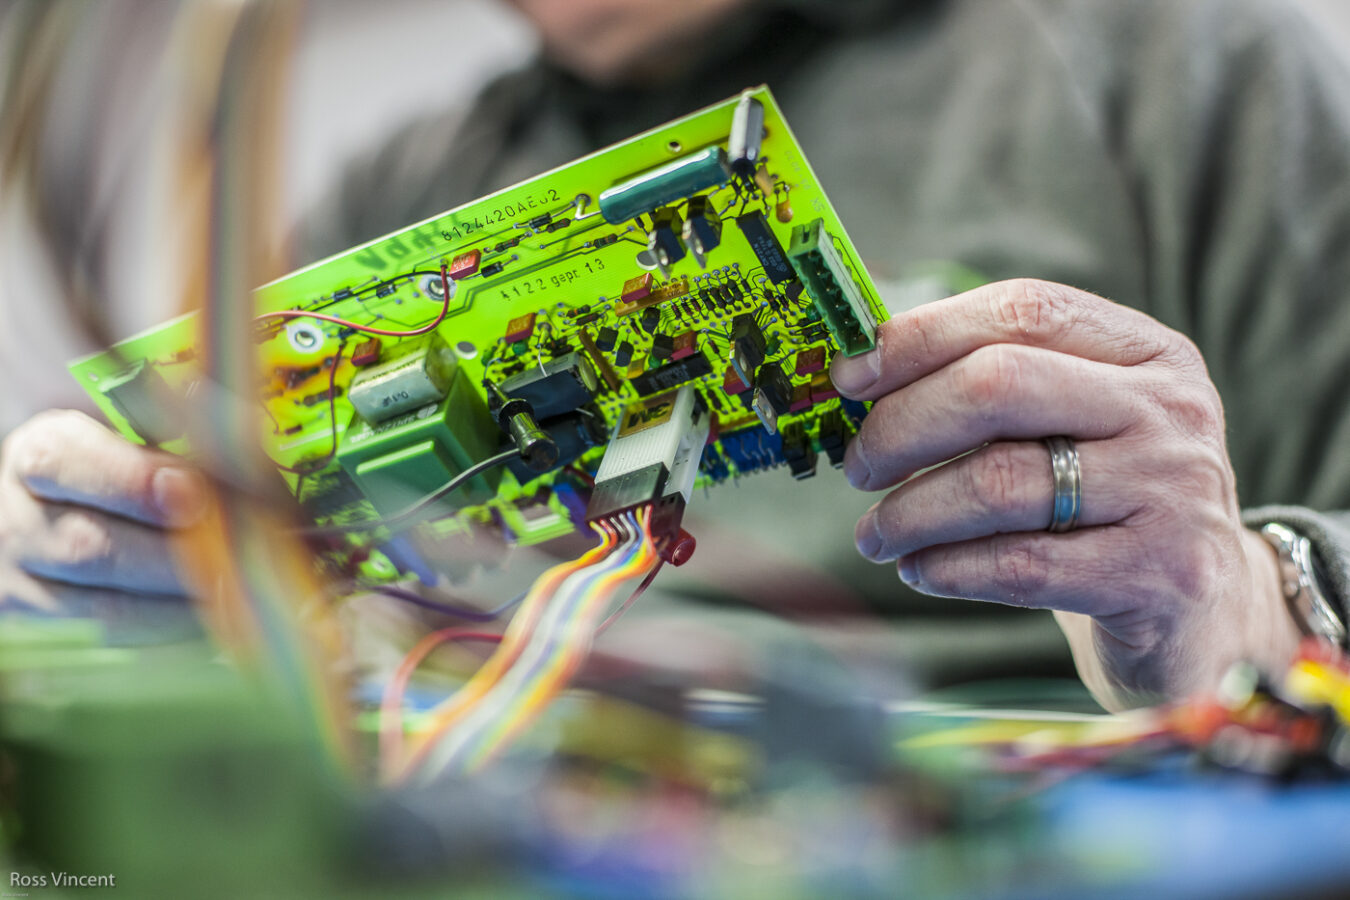 photograph of repair and inspection of a circuit board, close-up detailed image, at Fletcher Moorland, Stoke-on-Trent